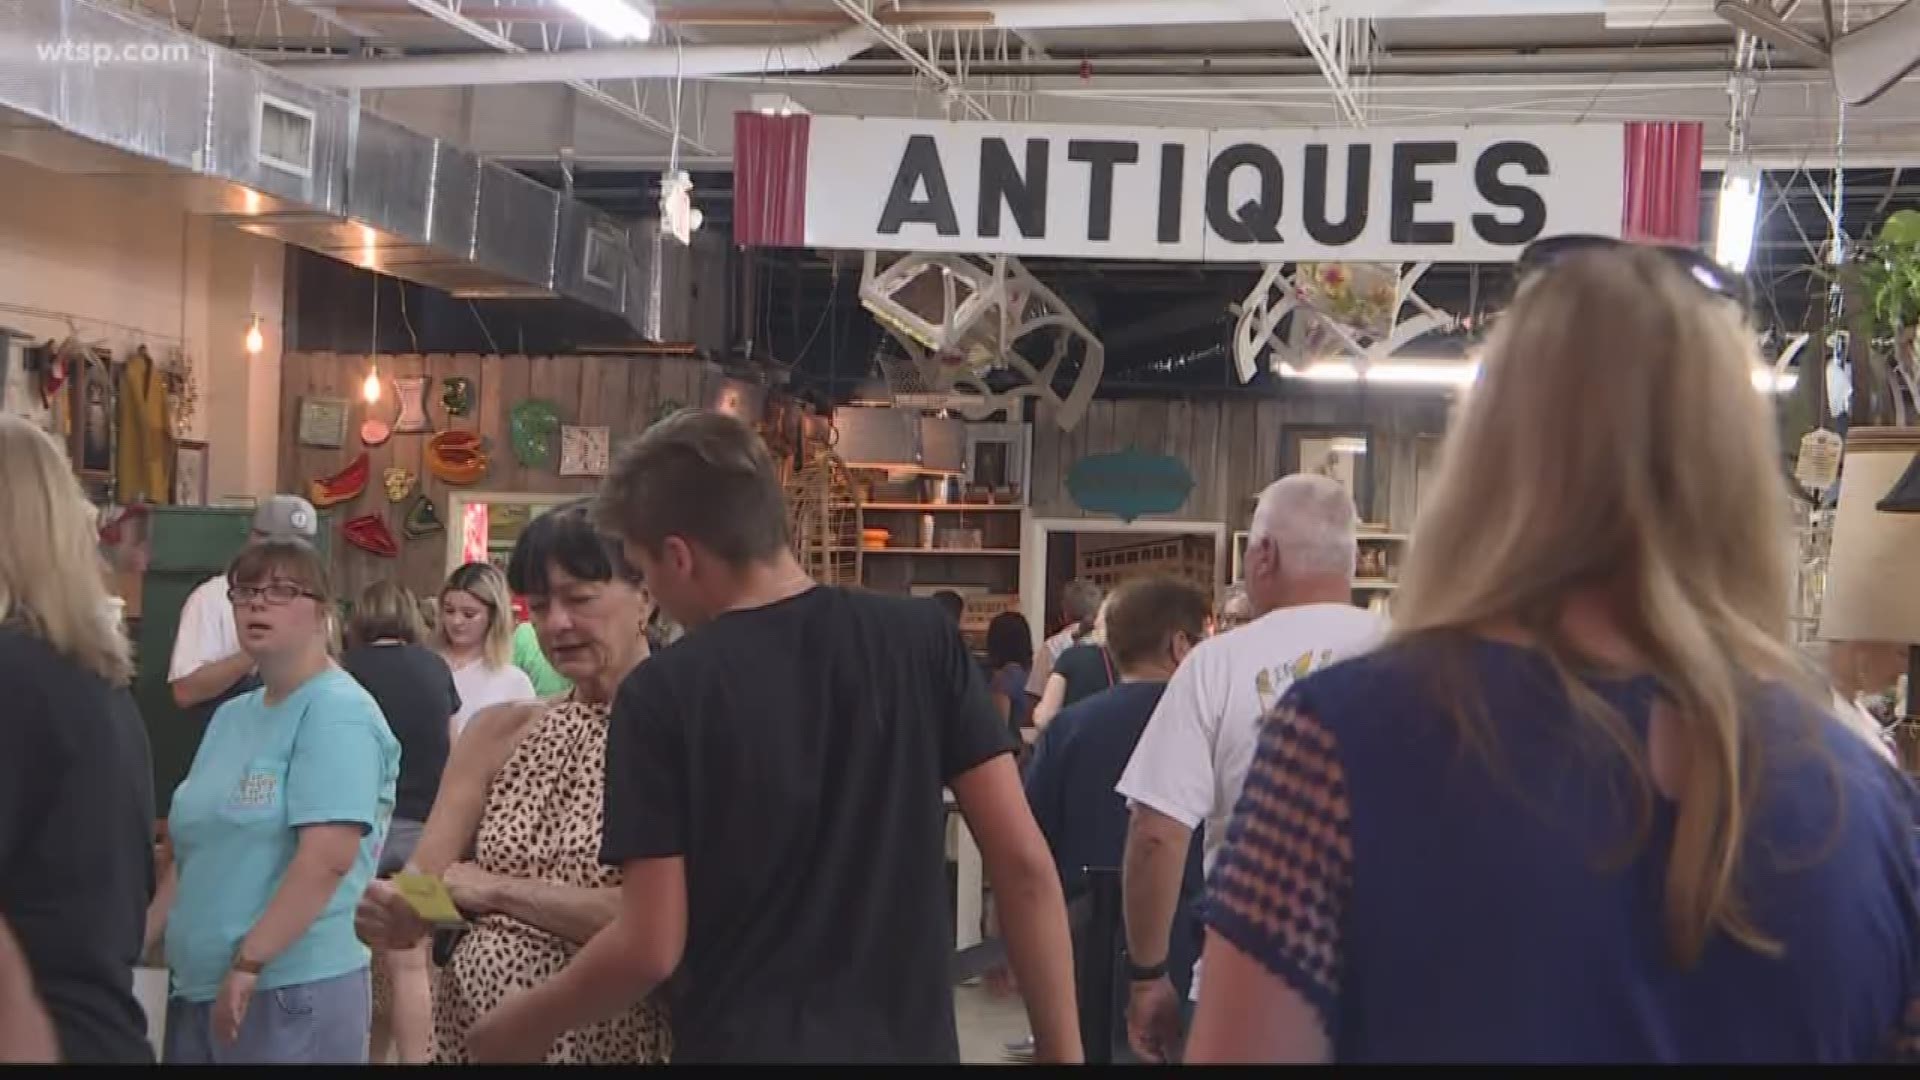 After more than six years in business, loyal customers have come to love the once-a-month vintage market, even lining up before the doors even open.